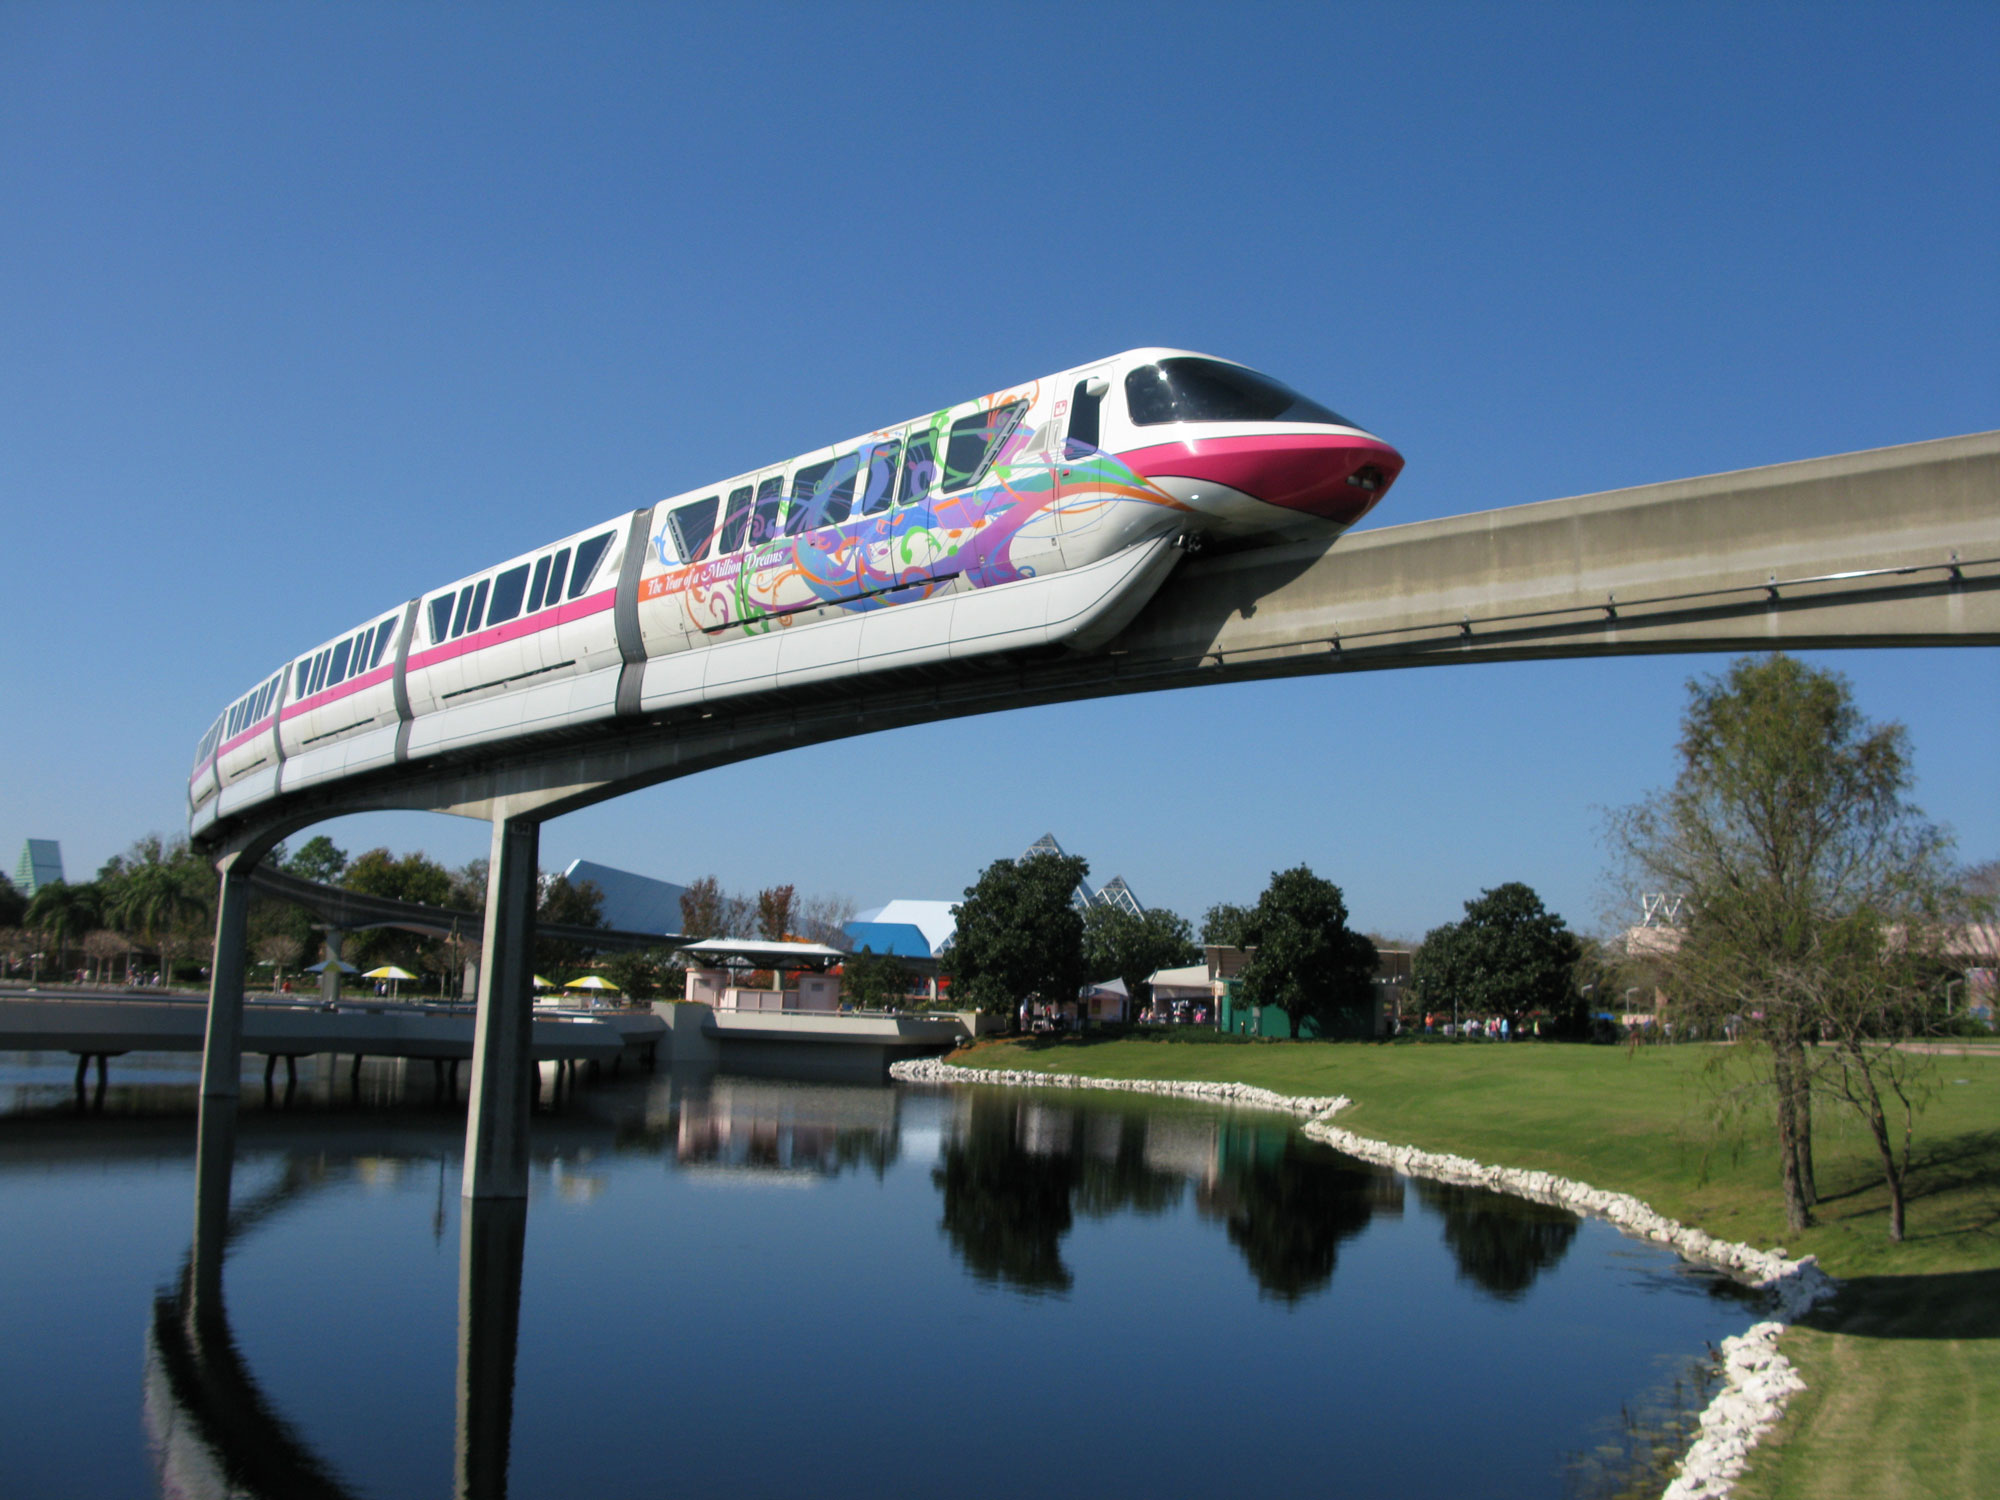 Pink monorail passing by